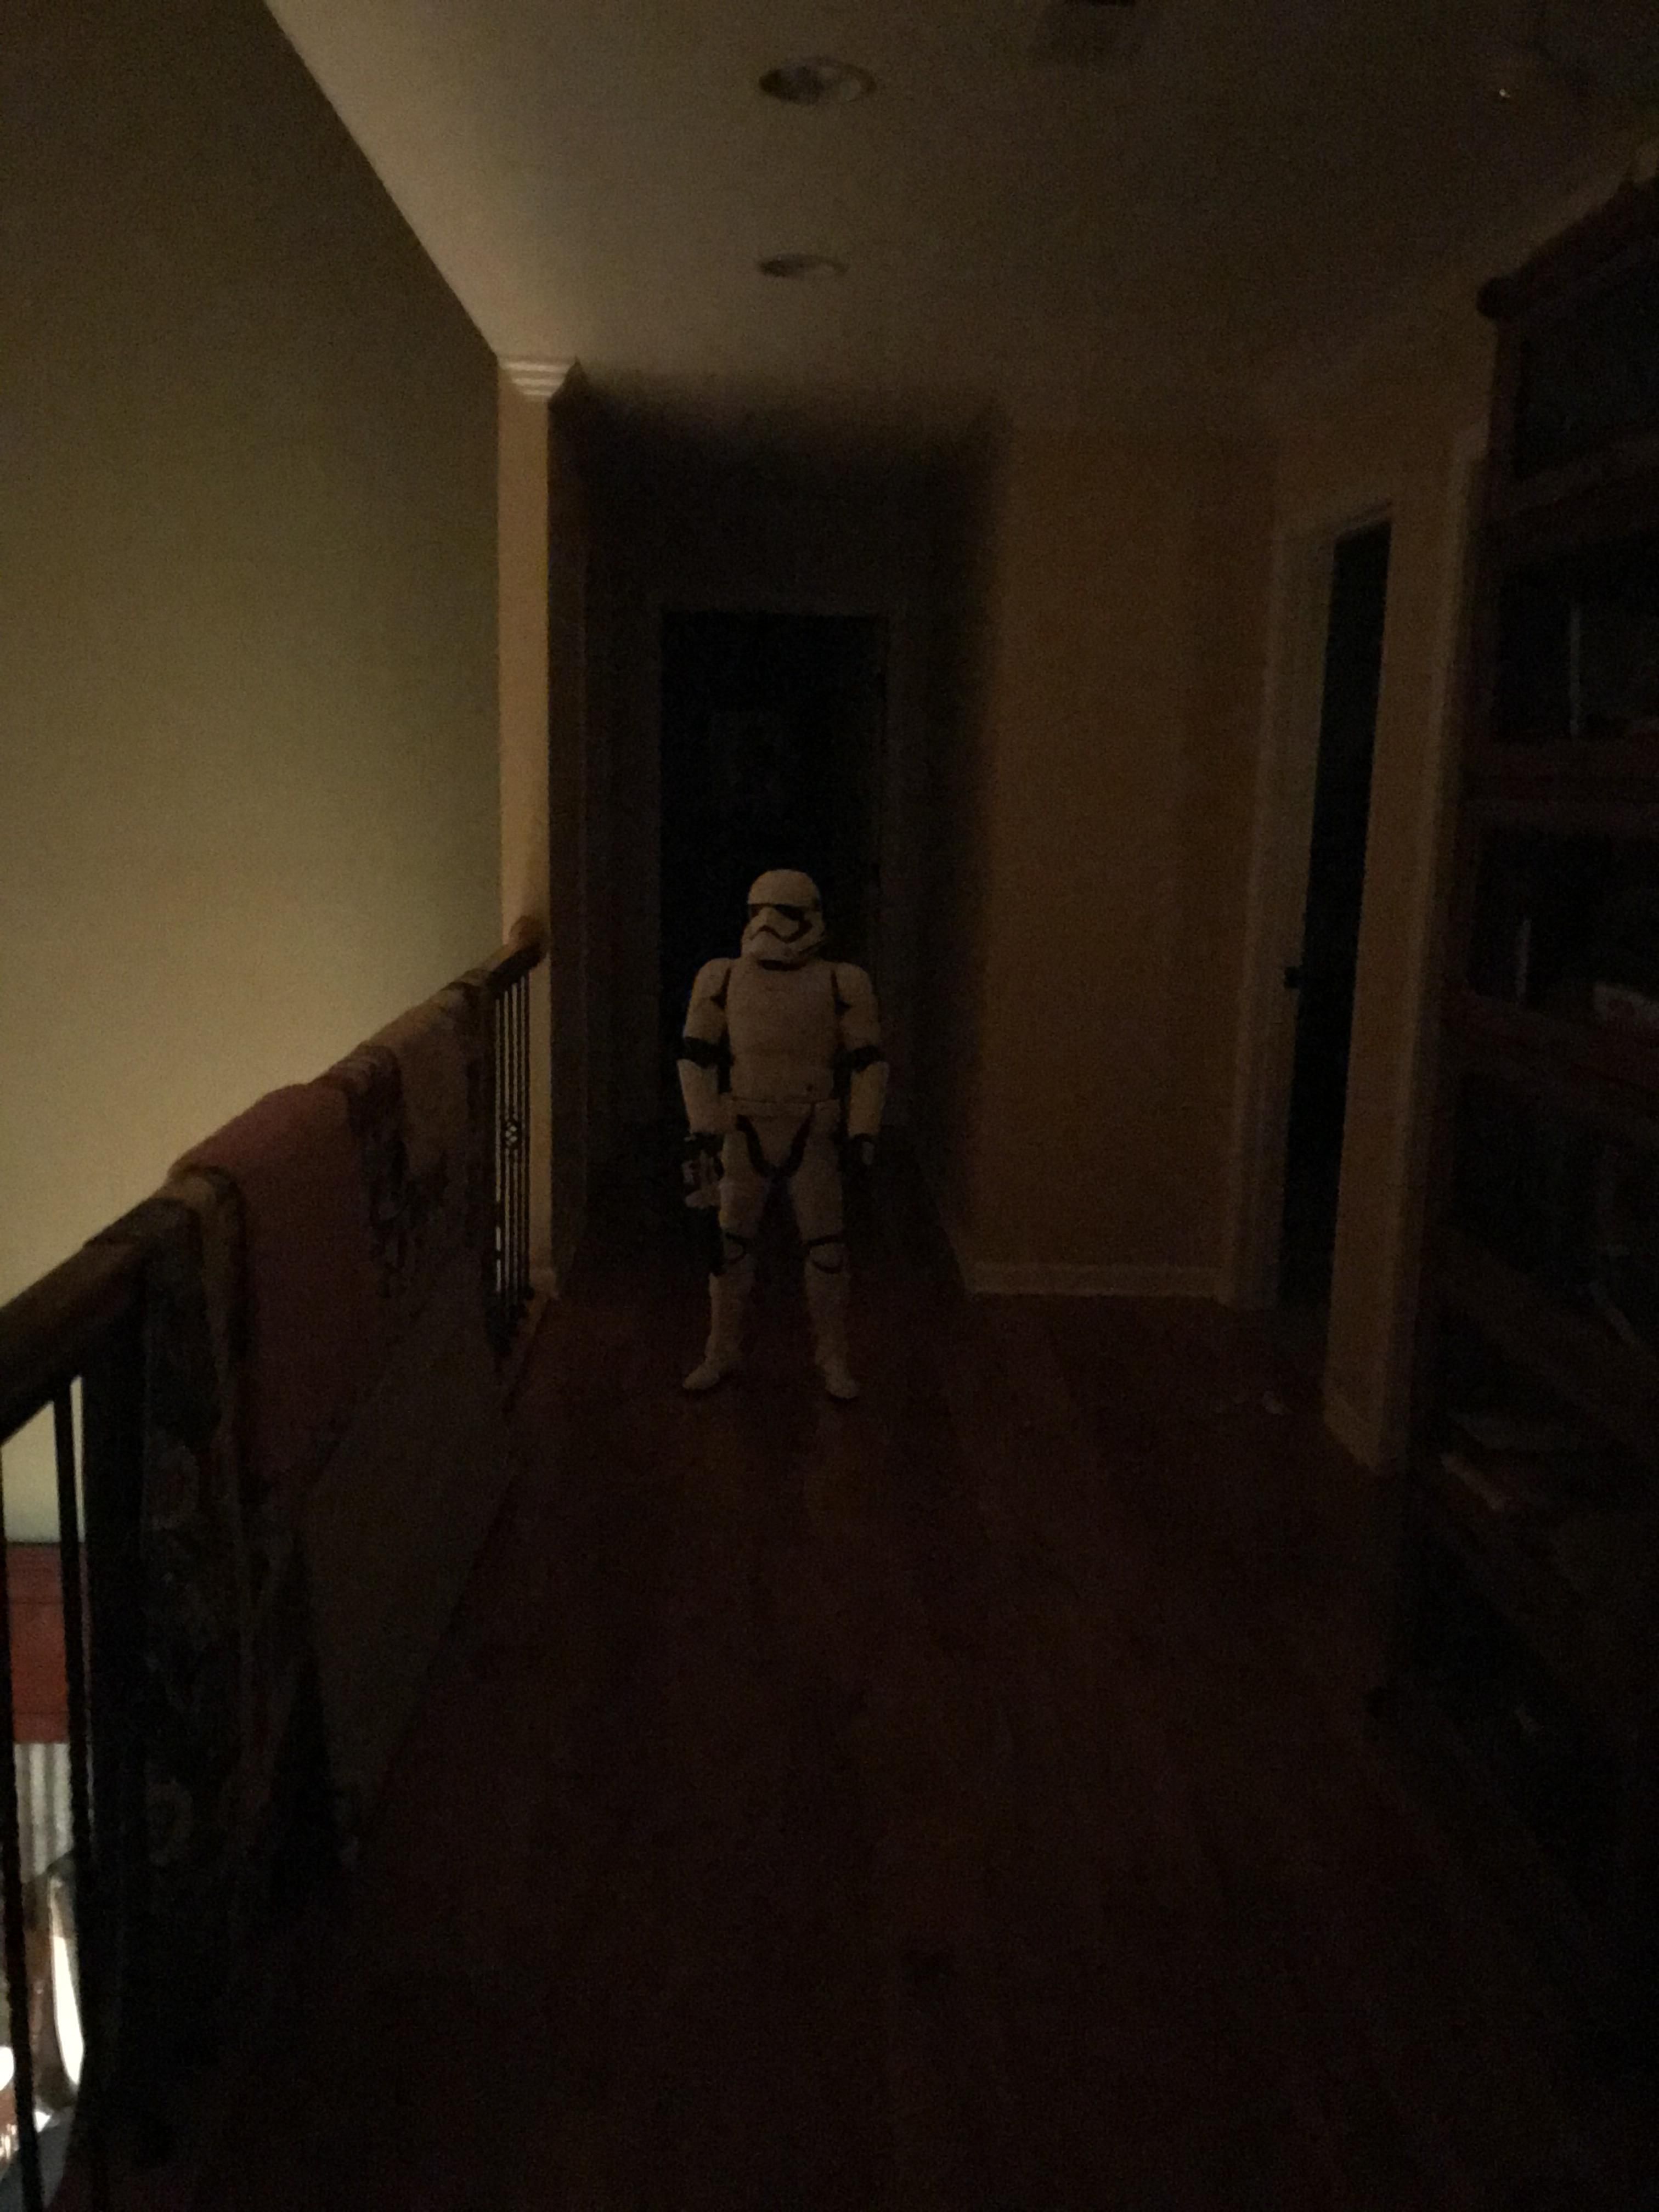 My 4 year old nephew about killed me last night at 2 am. He moved his child sized storm trooper into the hall next to the bathroom.